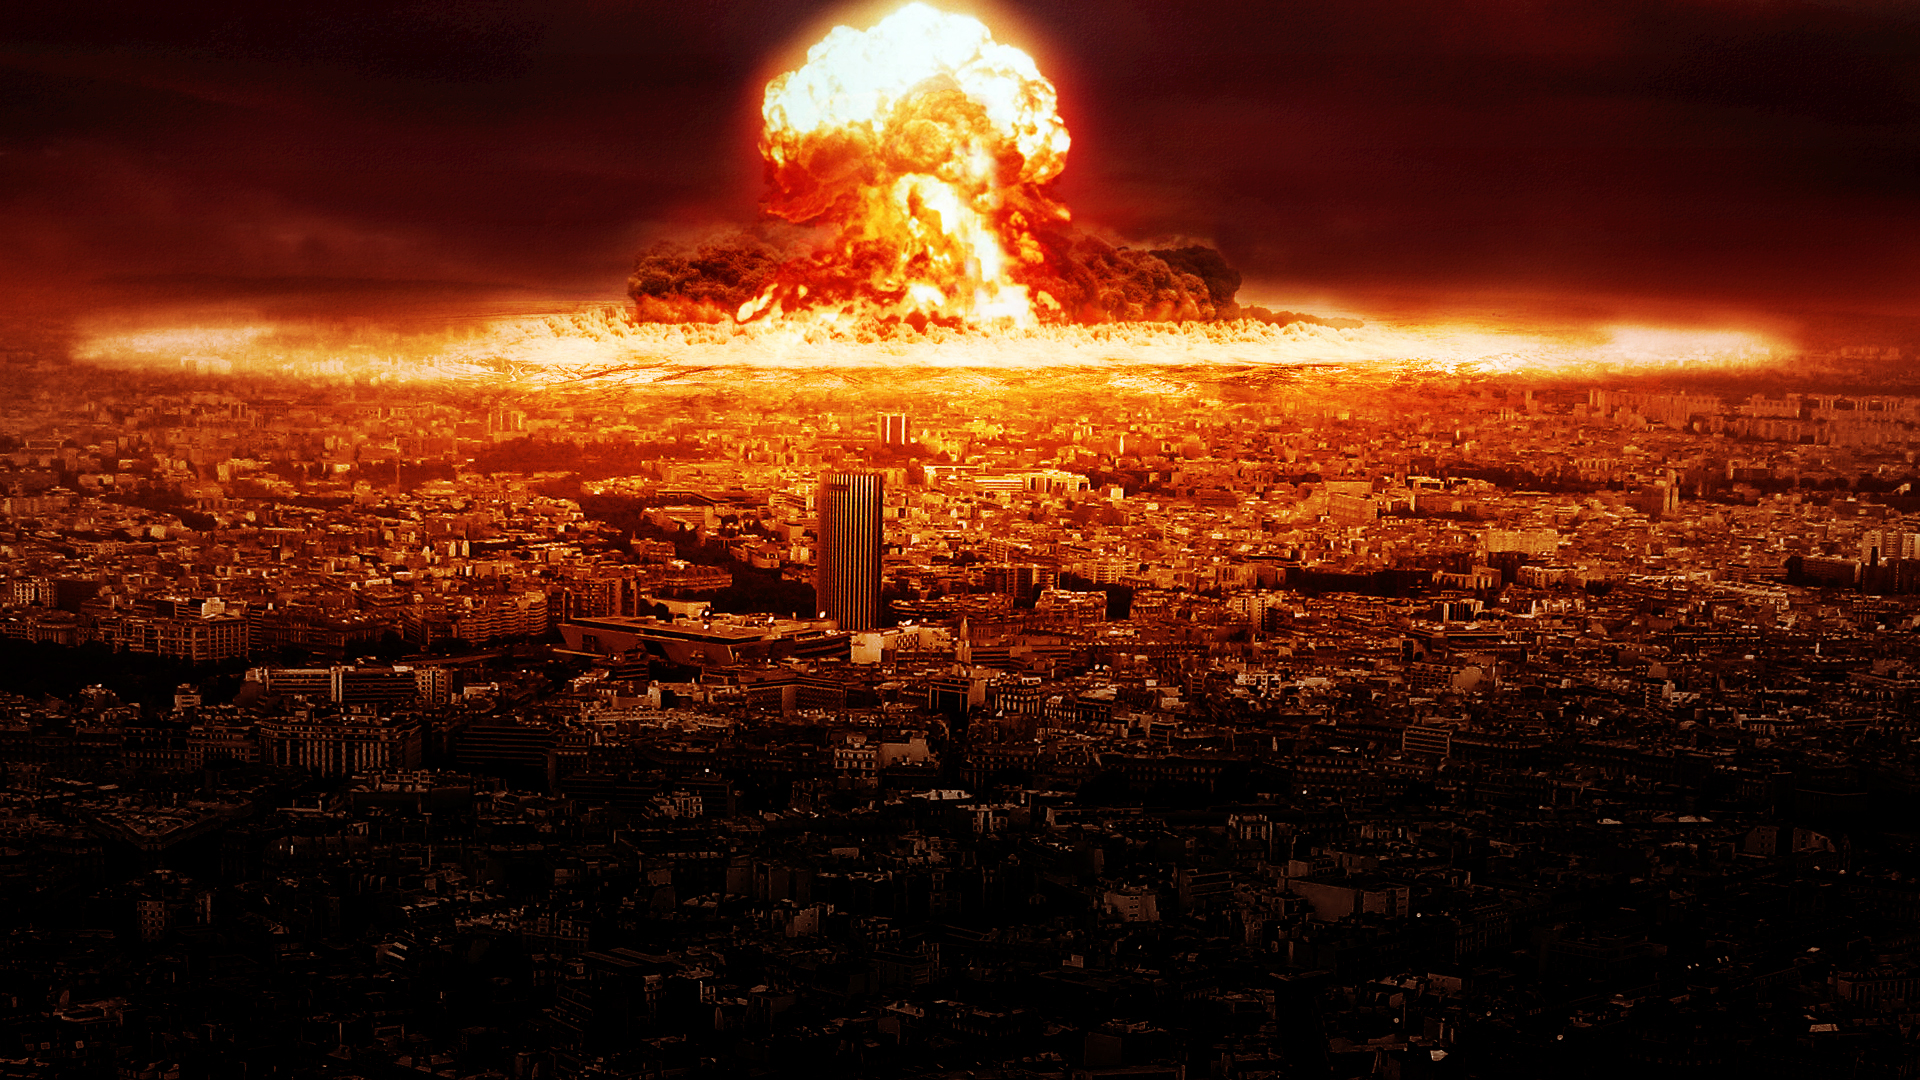 nuclear_explosion_by_theabp-d59sy3y.jpg